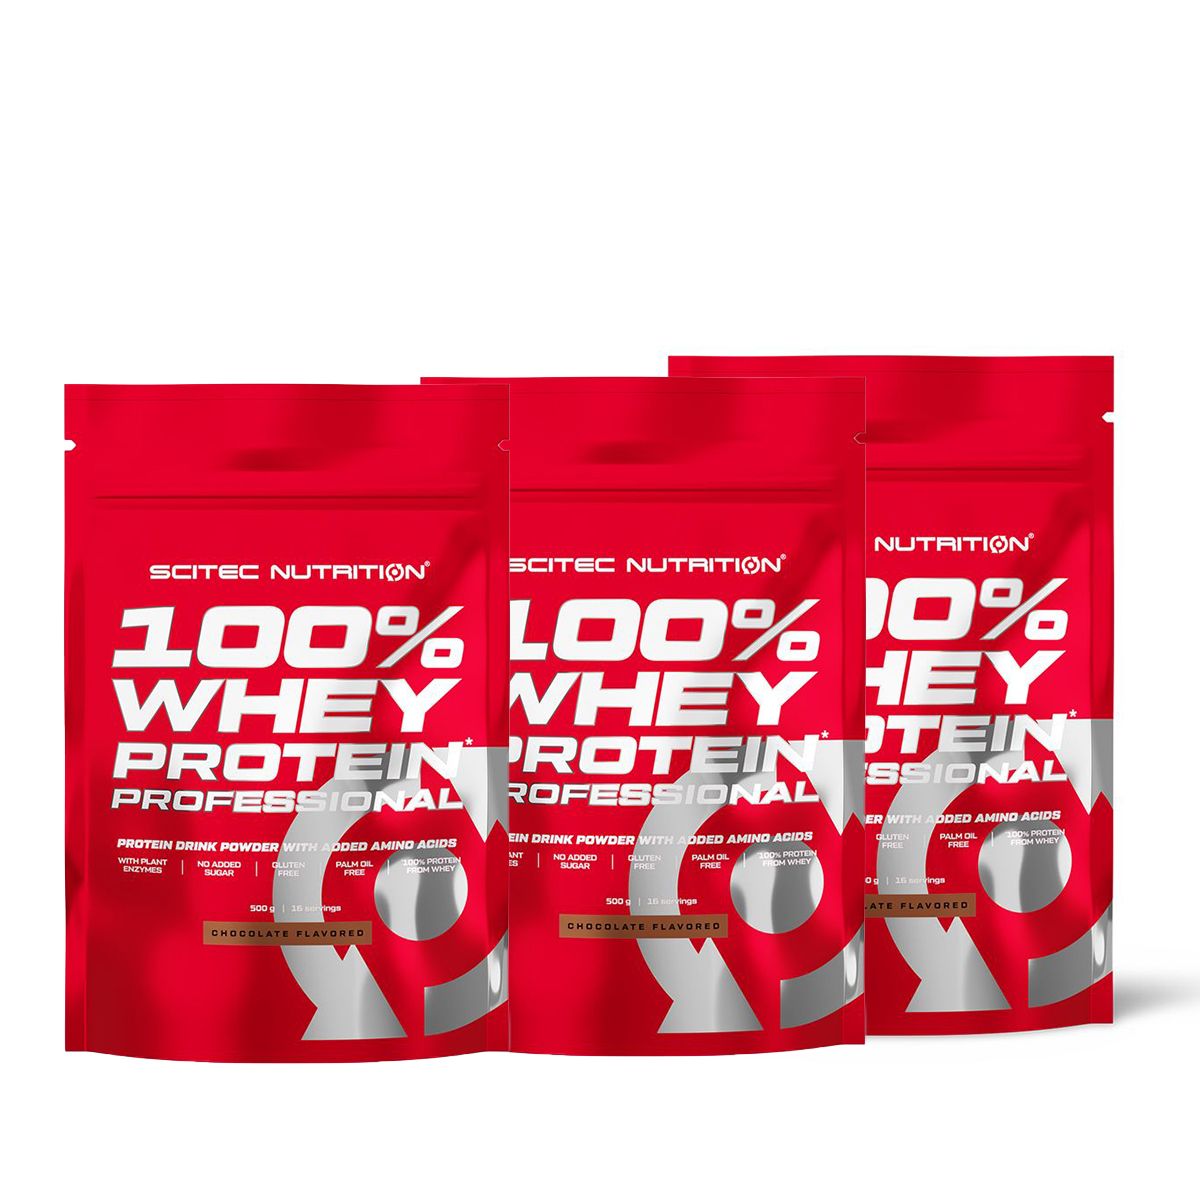 SCITEC NUTRITION - 100% WHEY PROTEIN PROFESSIONAL - 3 x 500 G